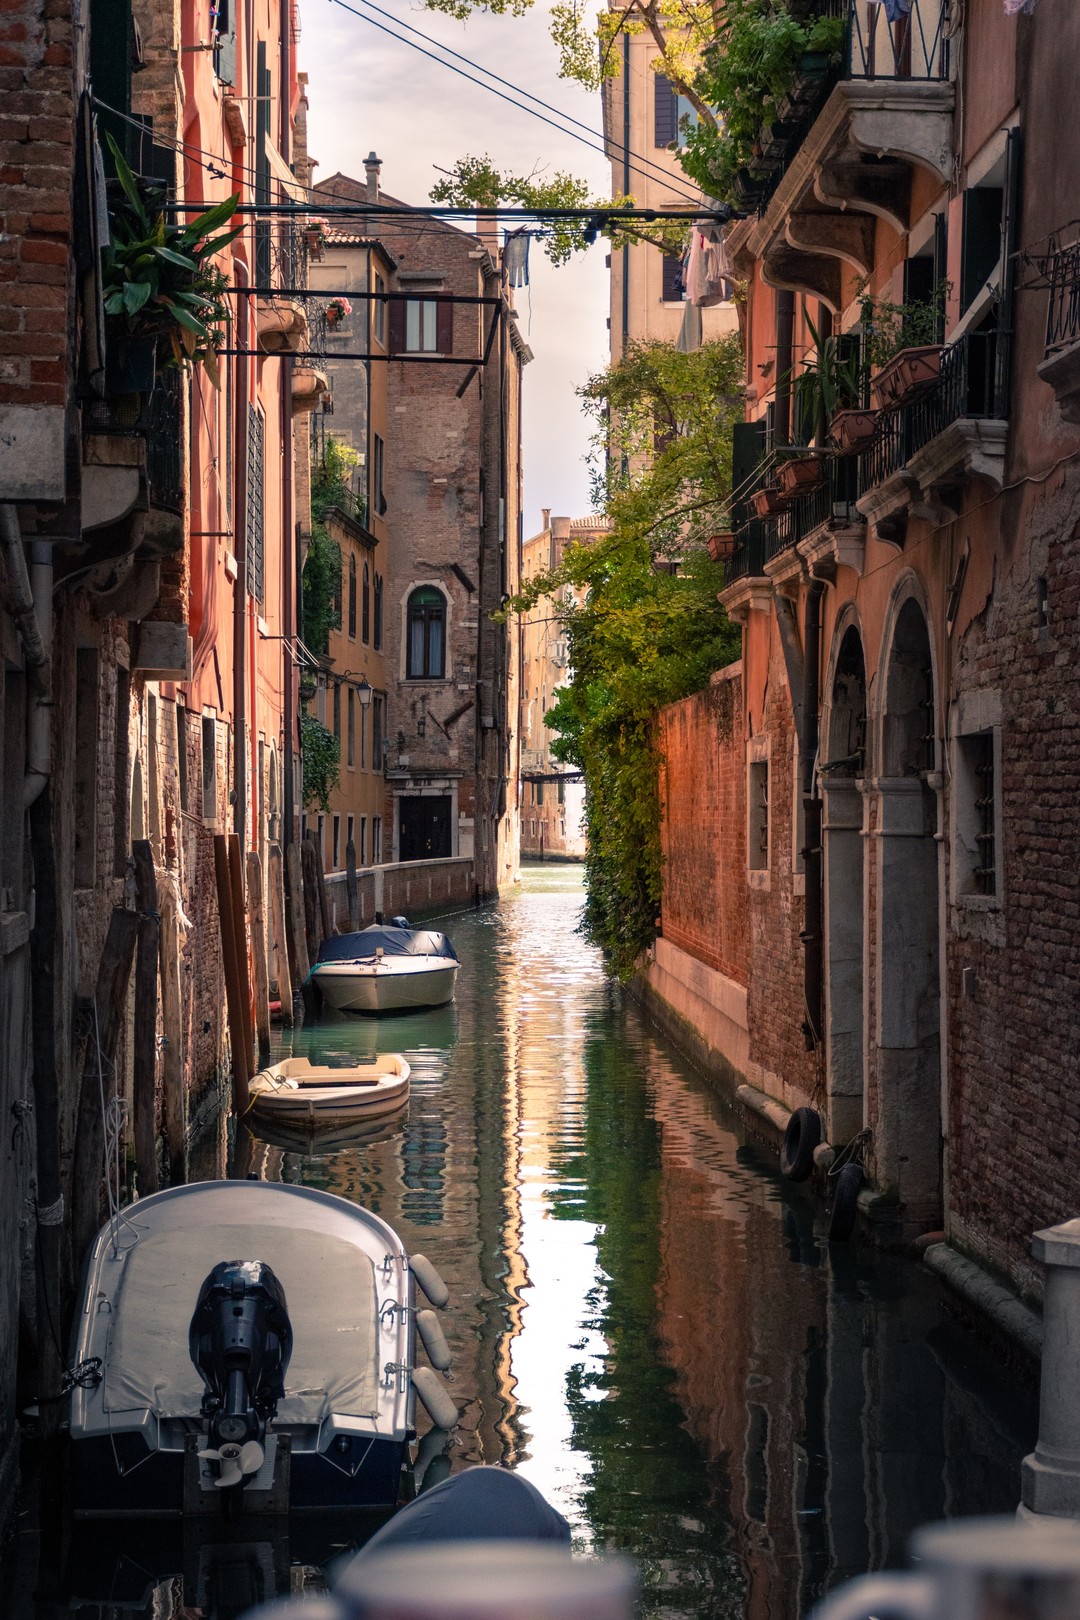 The Grand Canal in Venice: One of the best romantic getaways for couples who love culture.